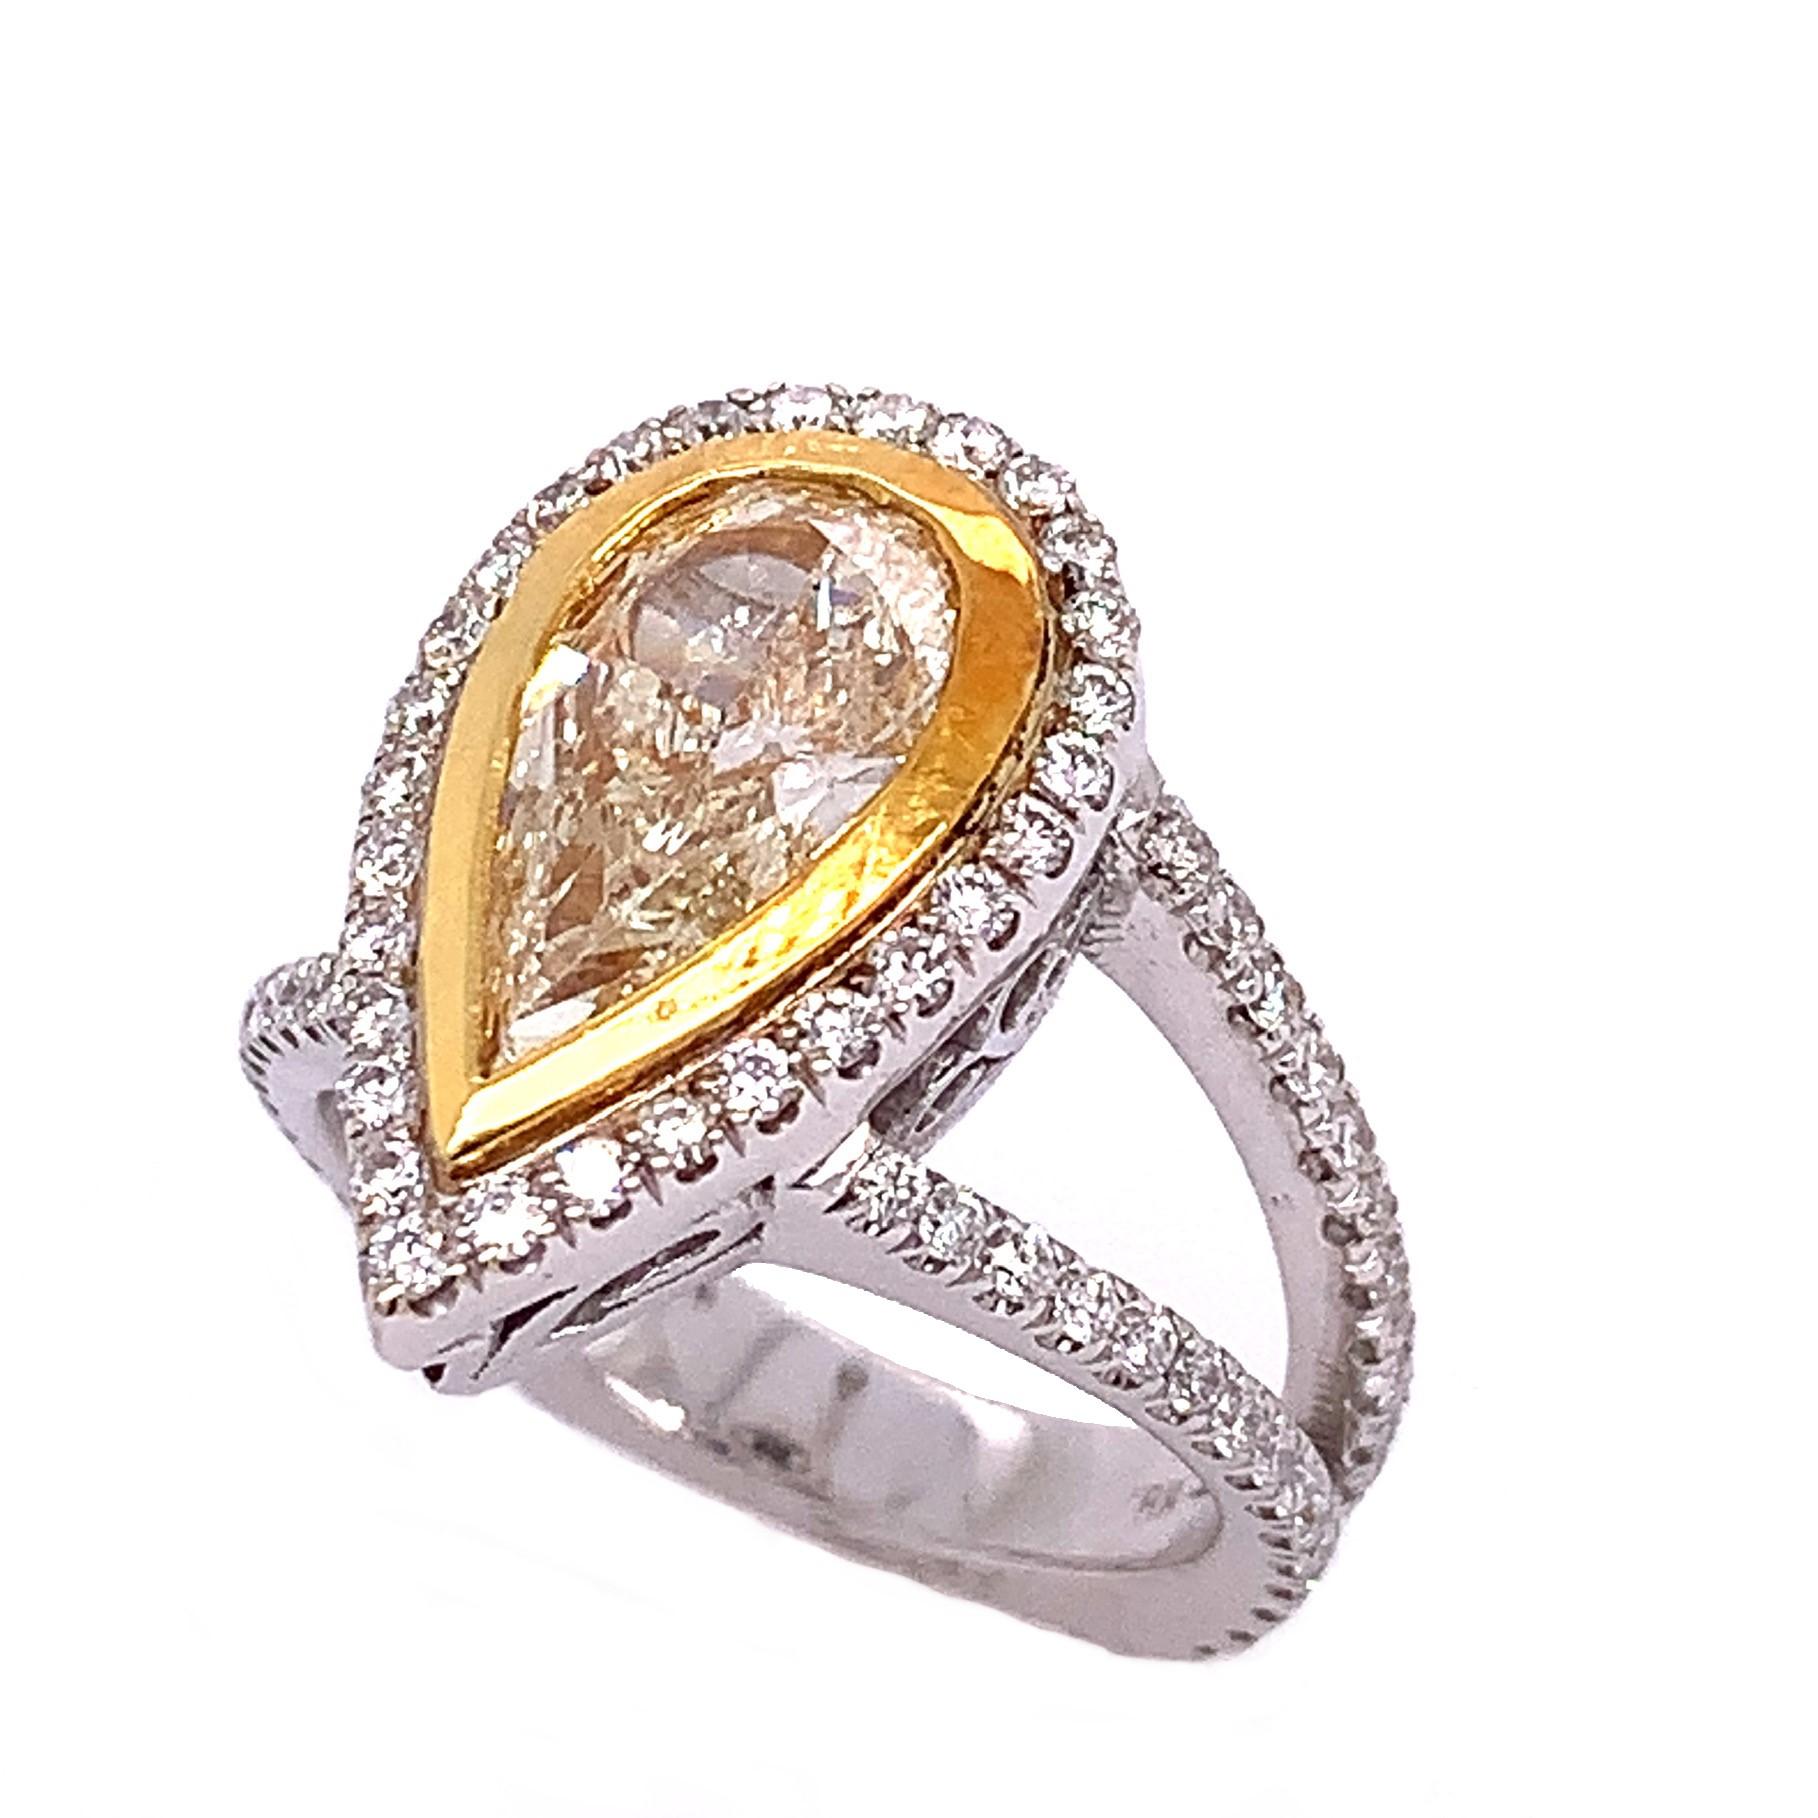 18K White and Yellow Gold
Fancy Diamond: 2.02ct total weight.
Diamond: 1.18ct total weight.